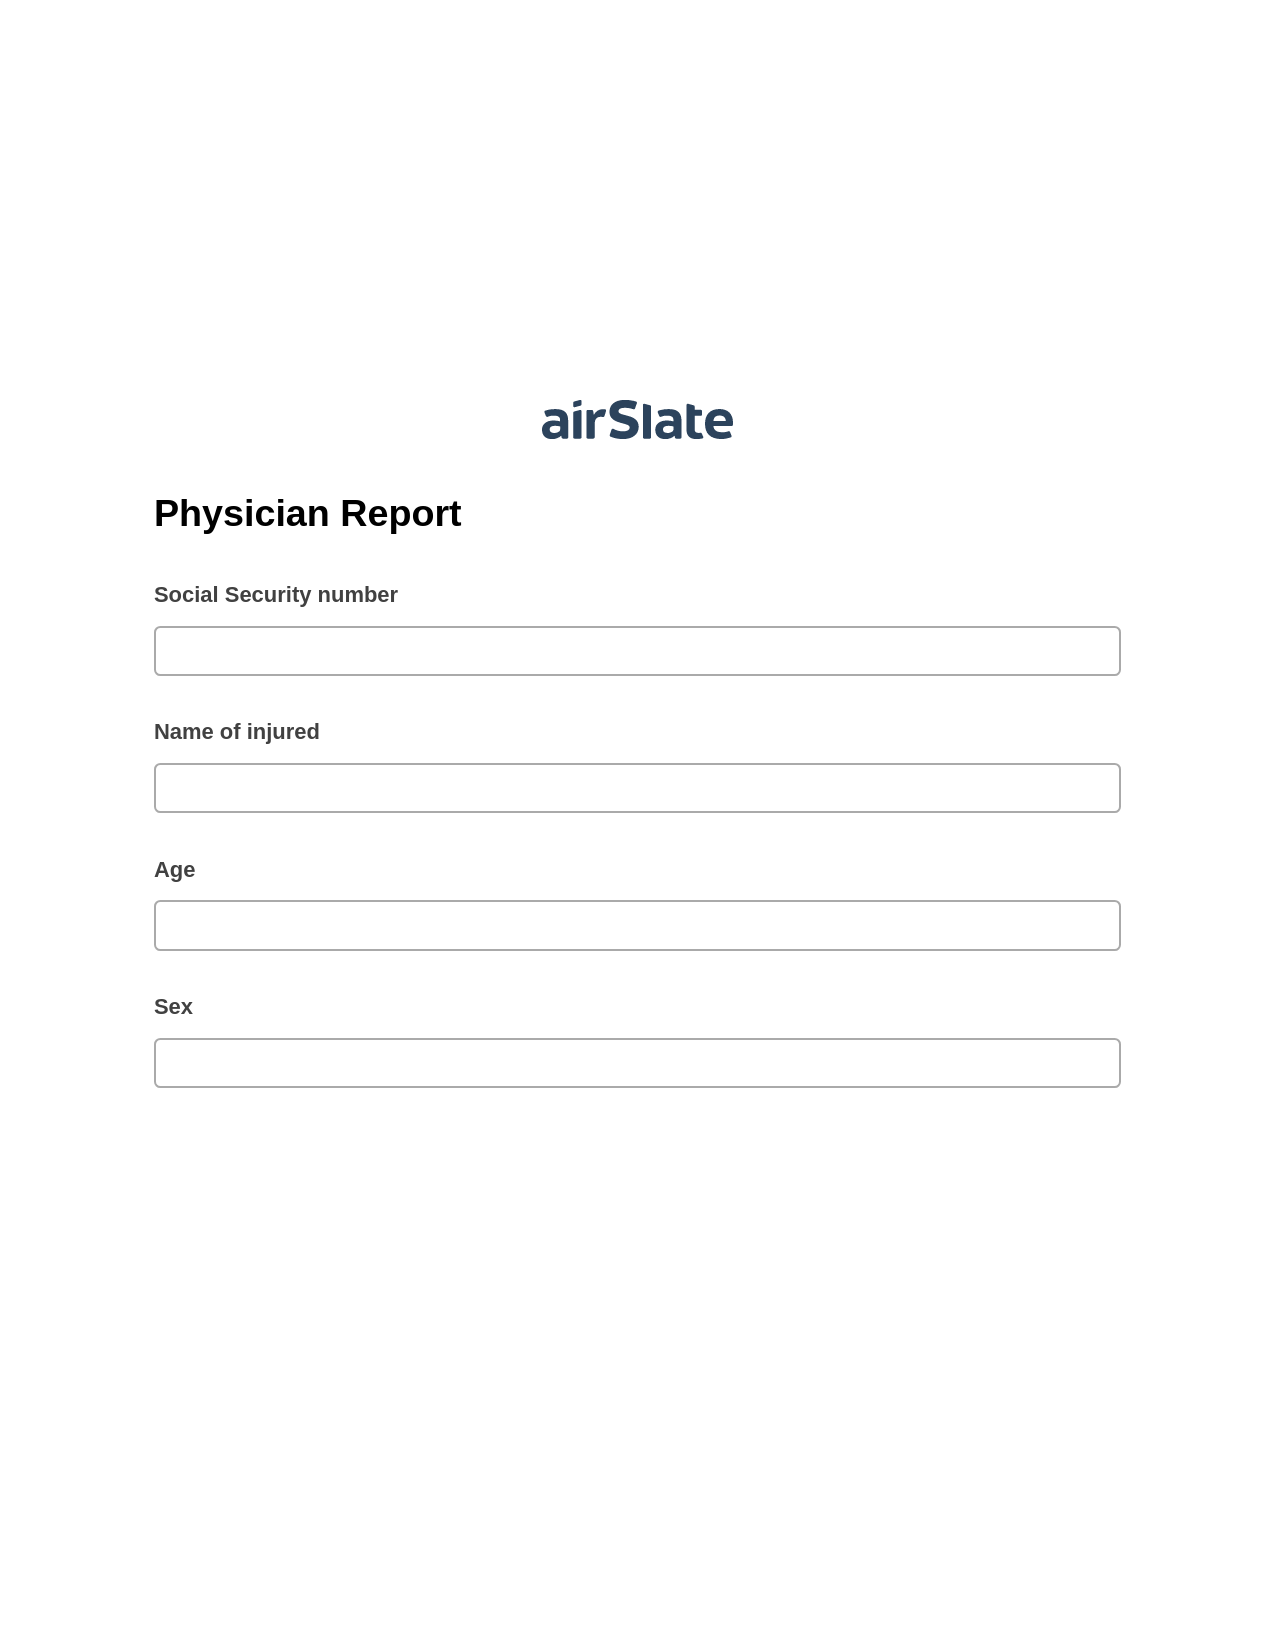 Multirole Physician Report Pre-fill from CSV File Bot, Create slate addon, Export to WebMerge Bot